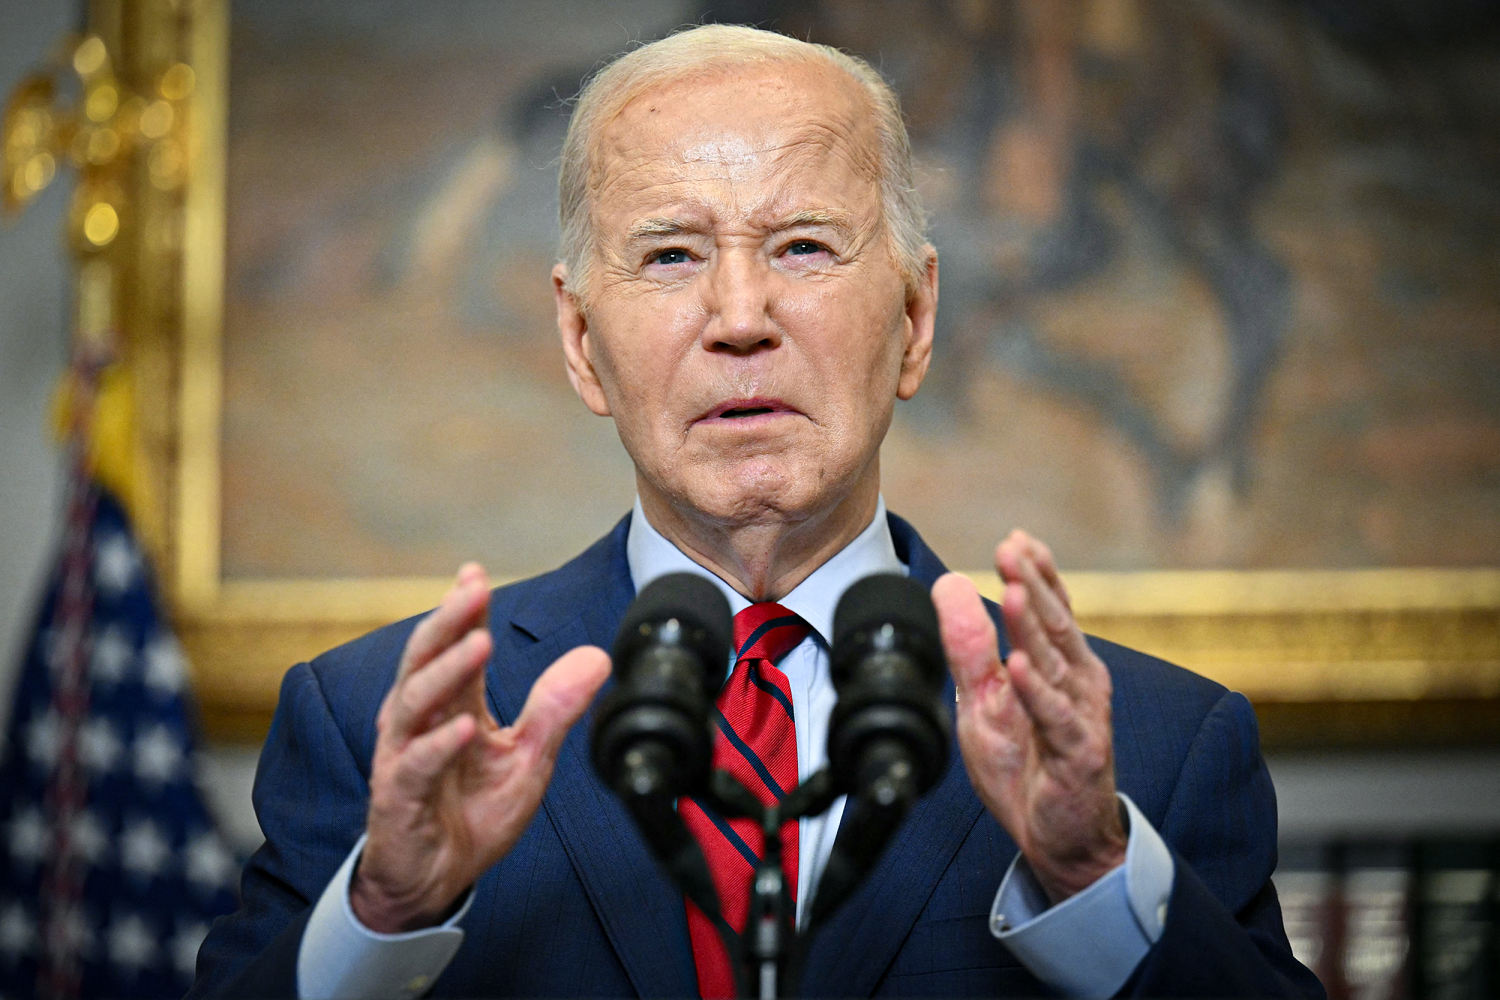 Why Biden decided to speak out about the campus protests after days of silence